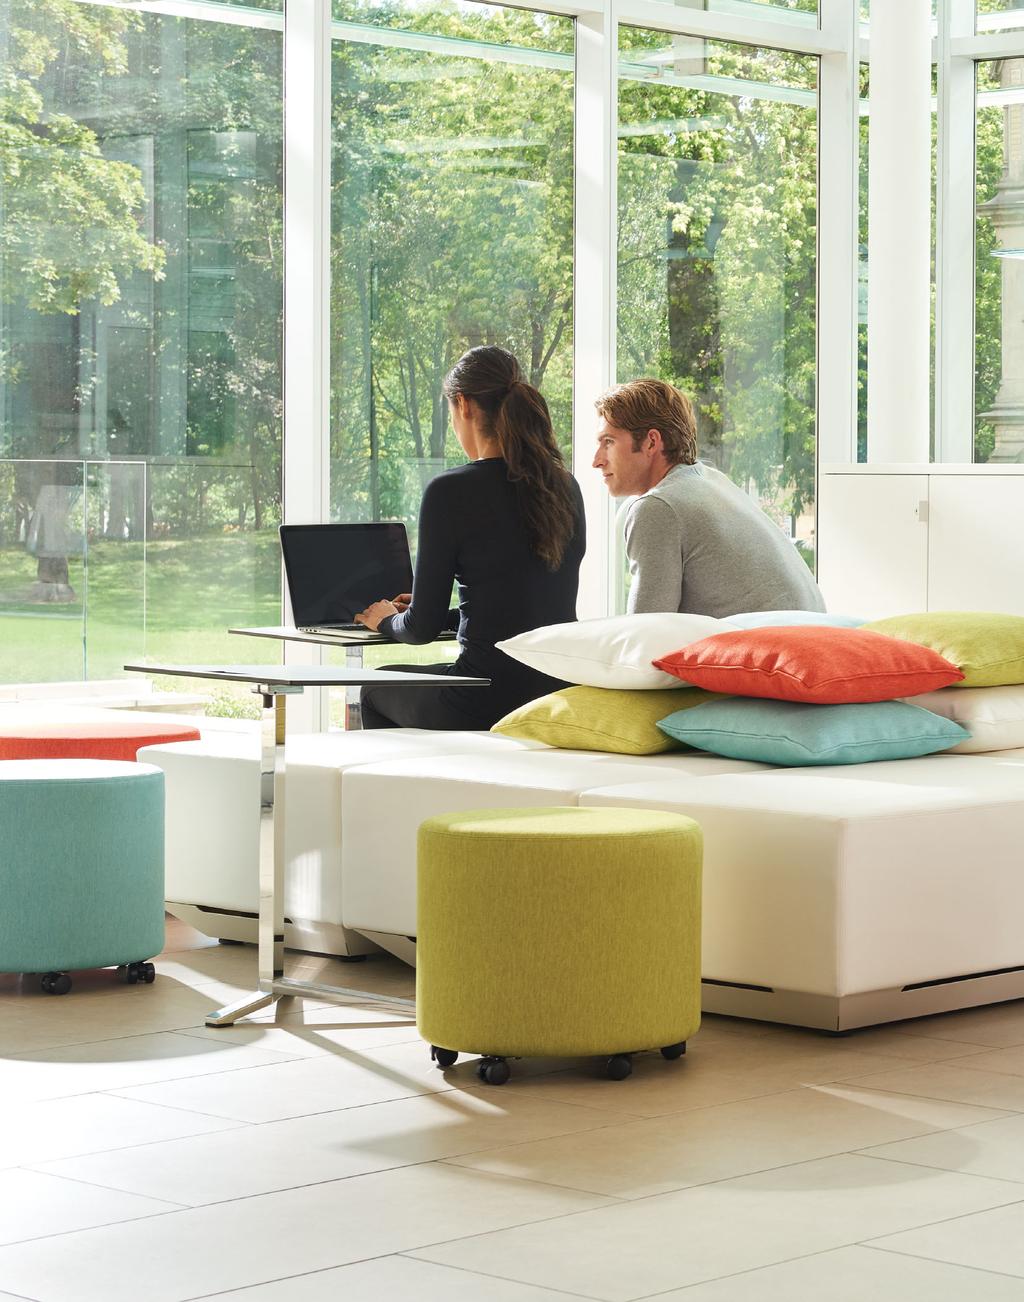 The collection upholstery Durable, White table surface Compact Laminate, Storm White collaborative ottomans